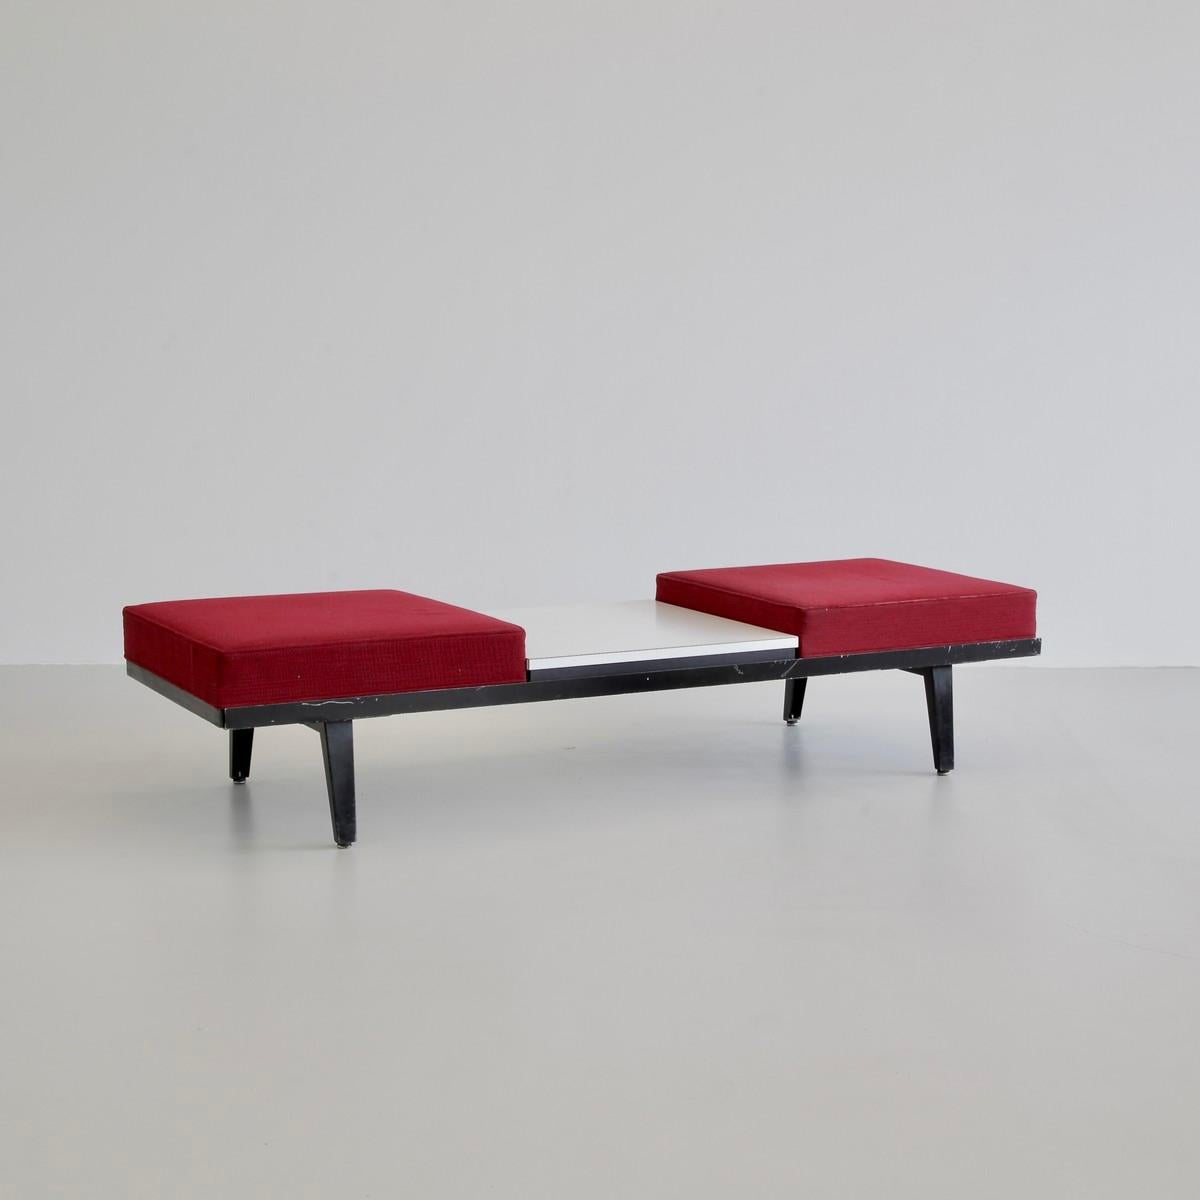 Mid-20th Century George NELSON Steel Frame Bench/ Table, 1955